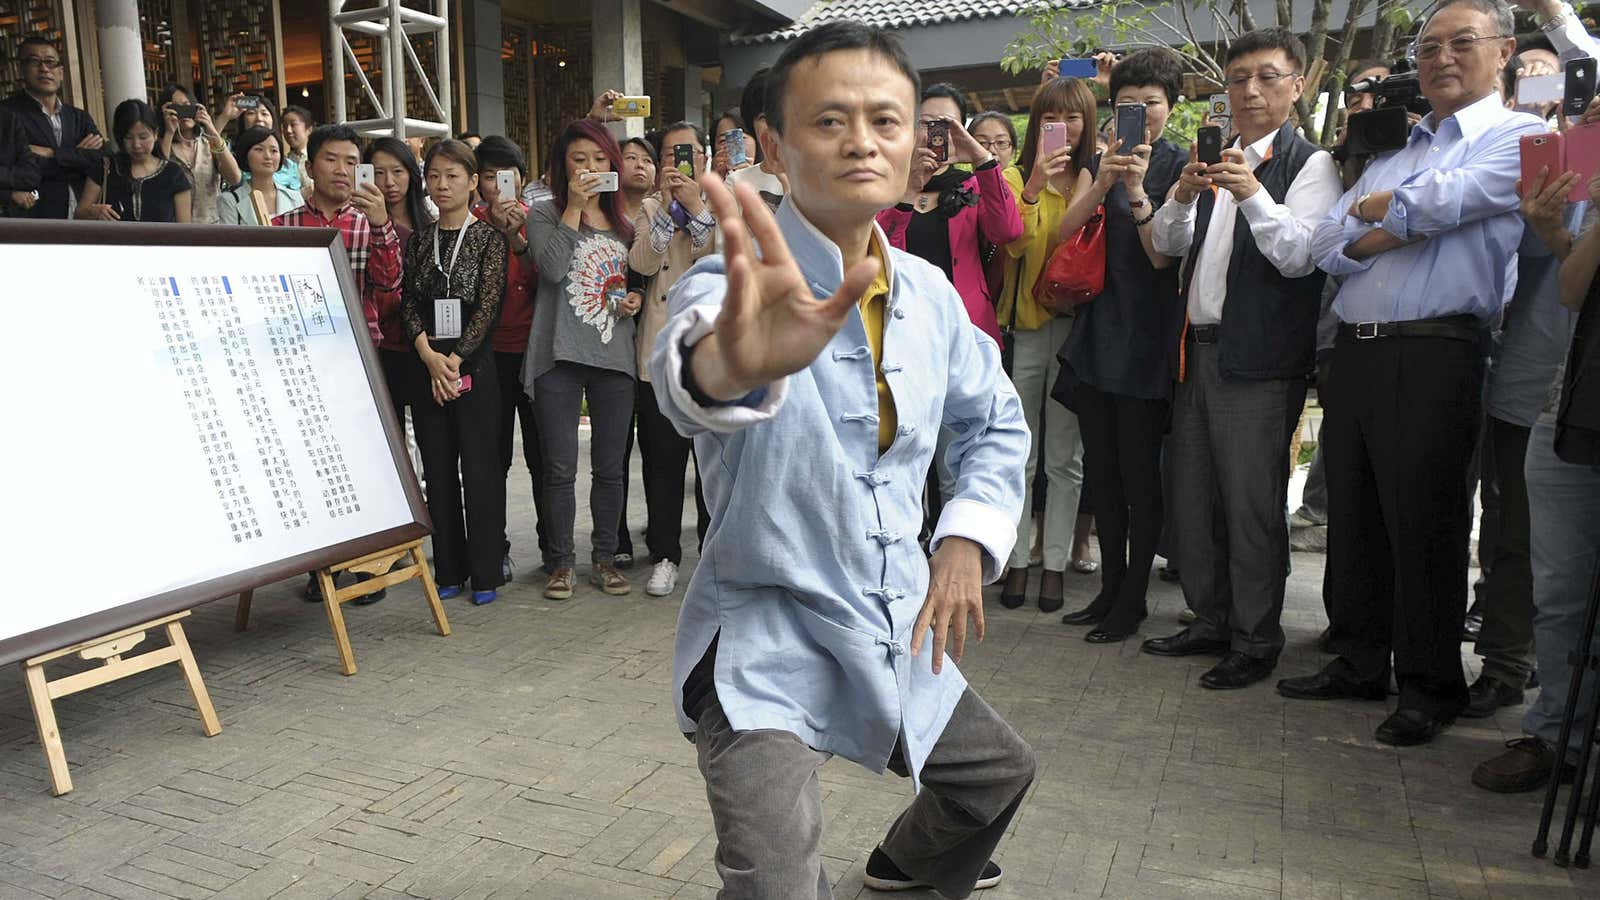 Alibaba founder Jack Ma tries his moves on the US.